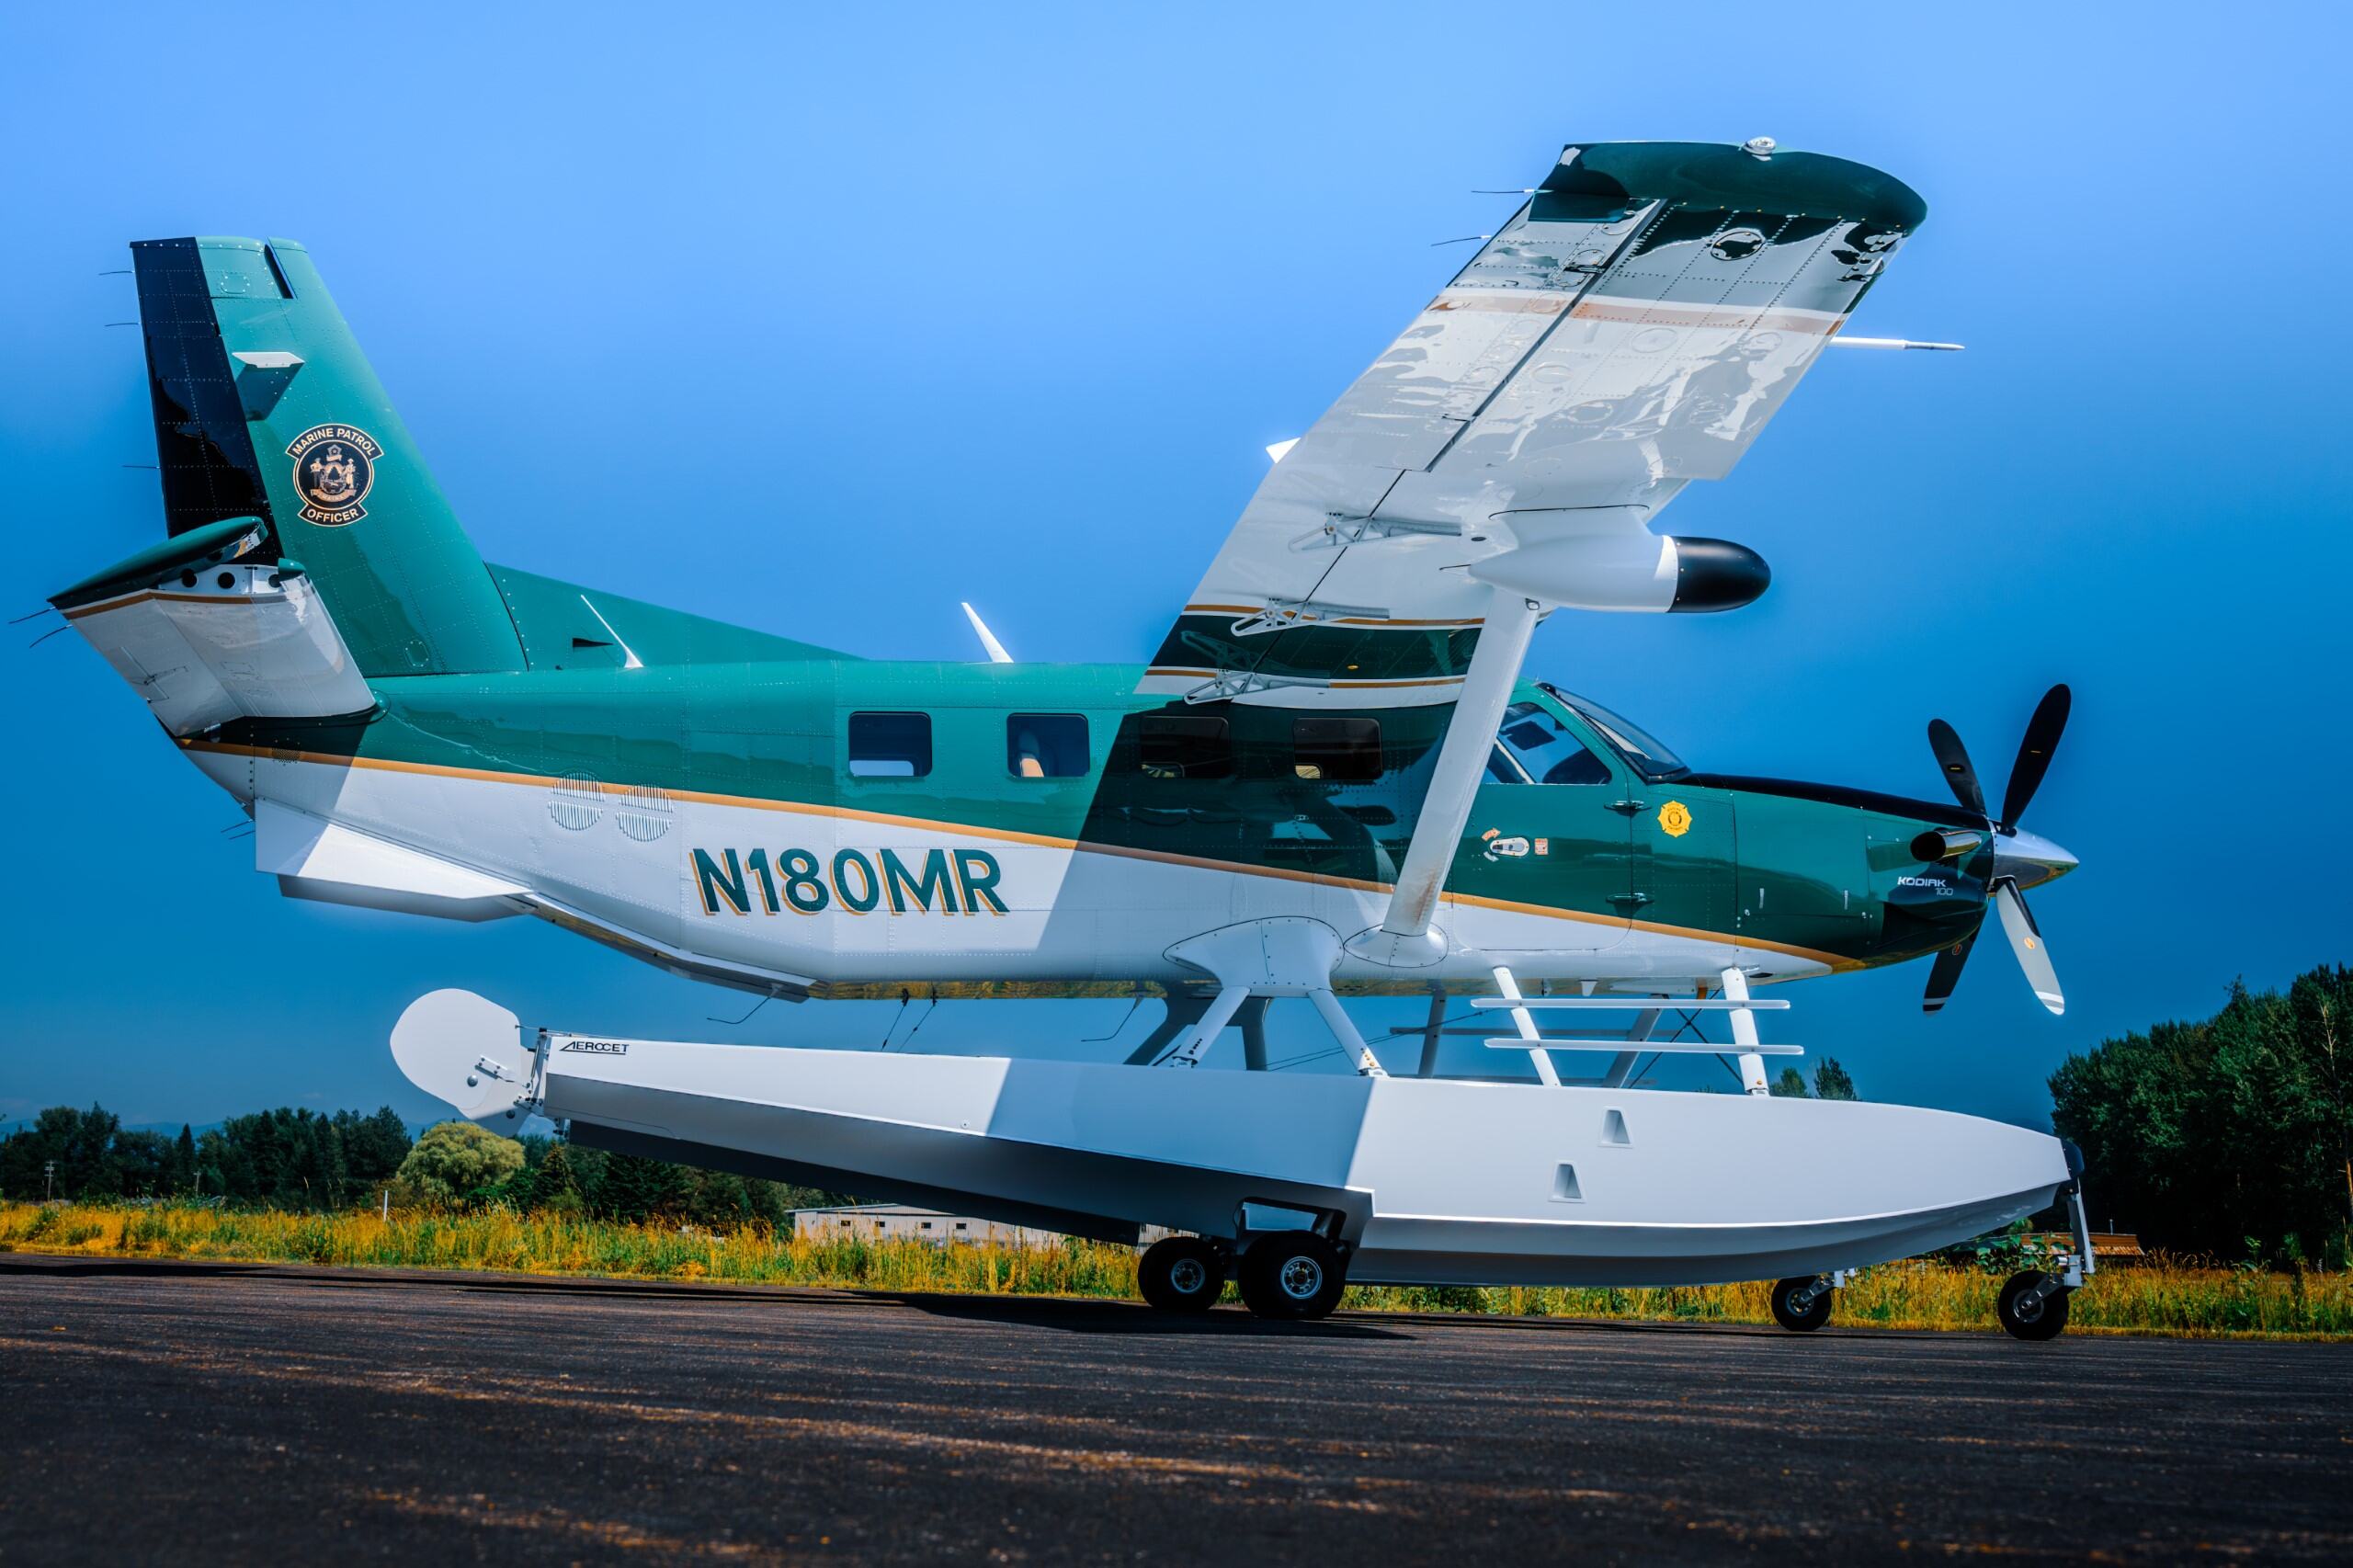 Daher delivers its latest Kodiak 100 in the multi-mission role for operation by the Maine Marine Patrol